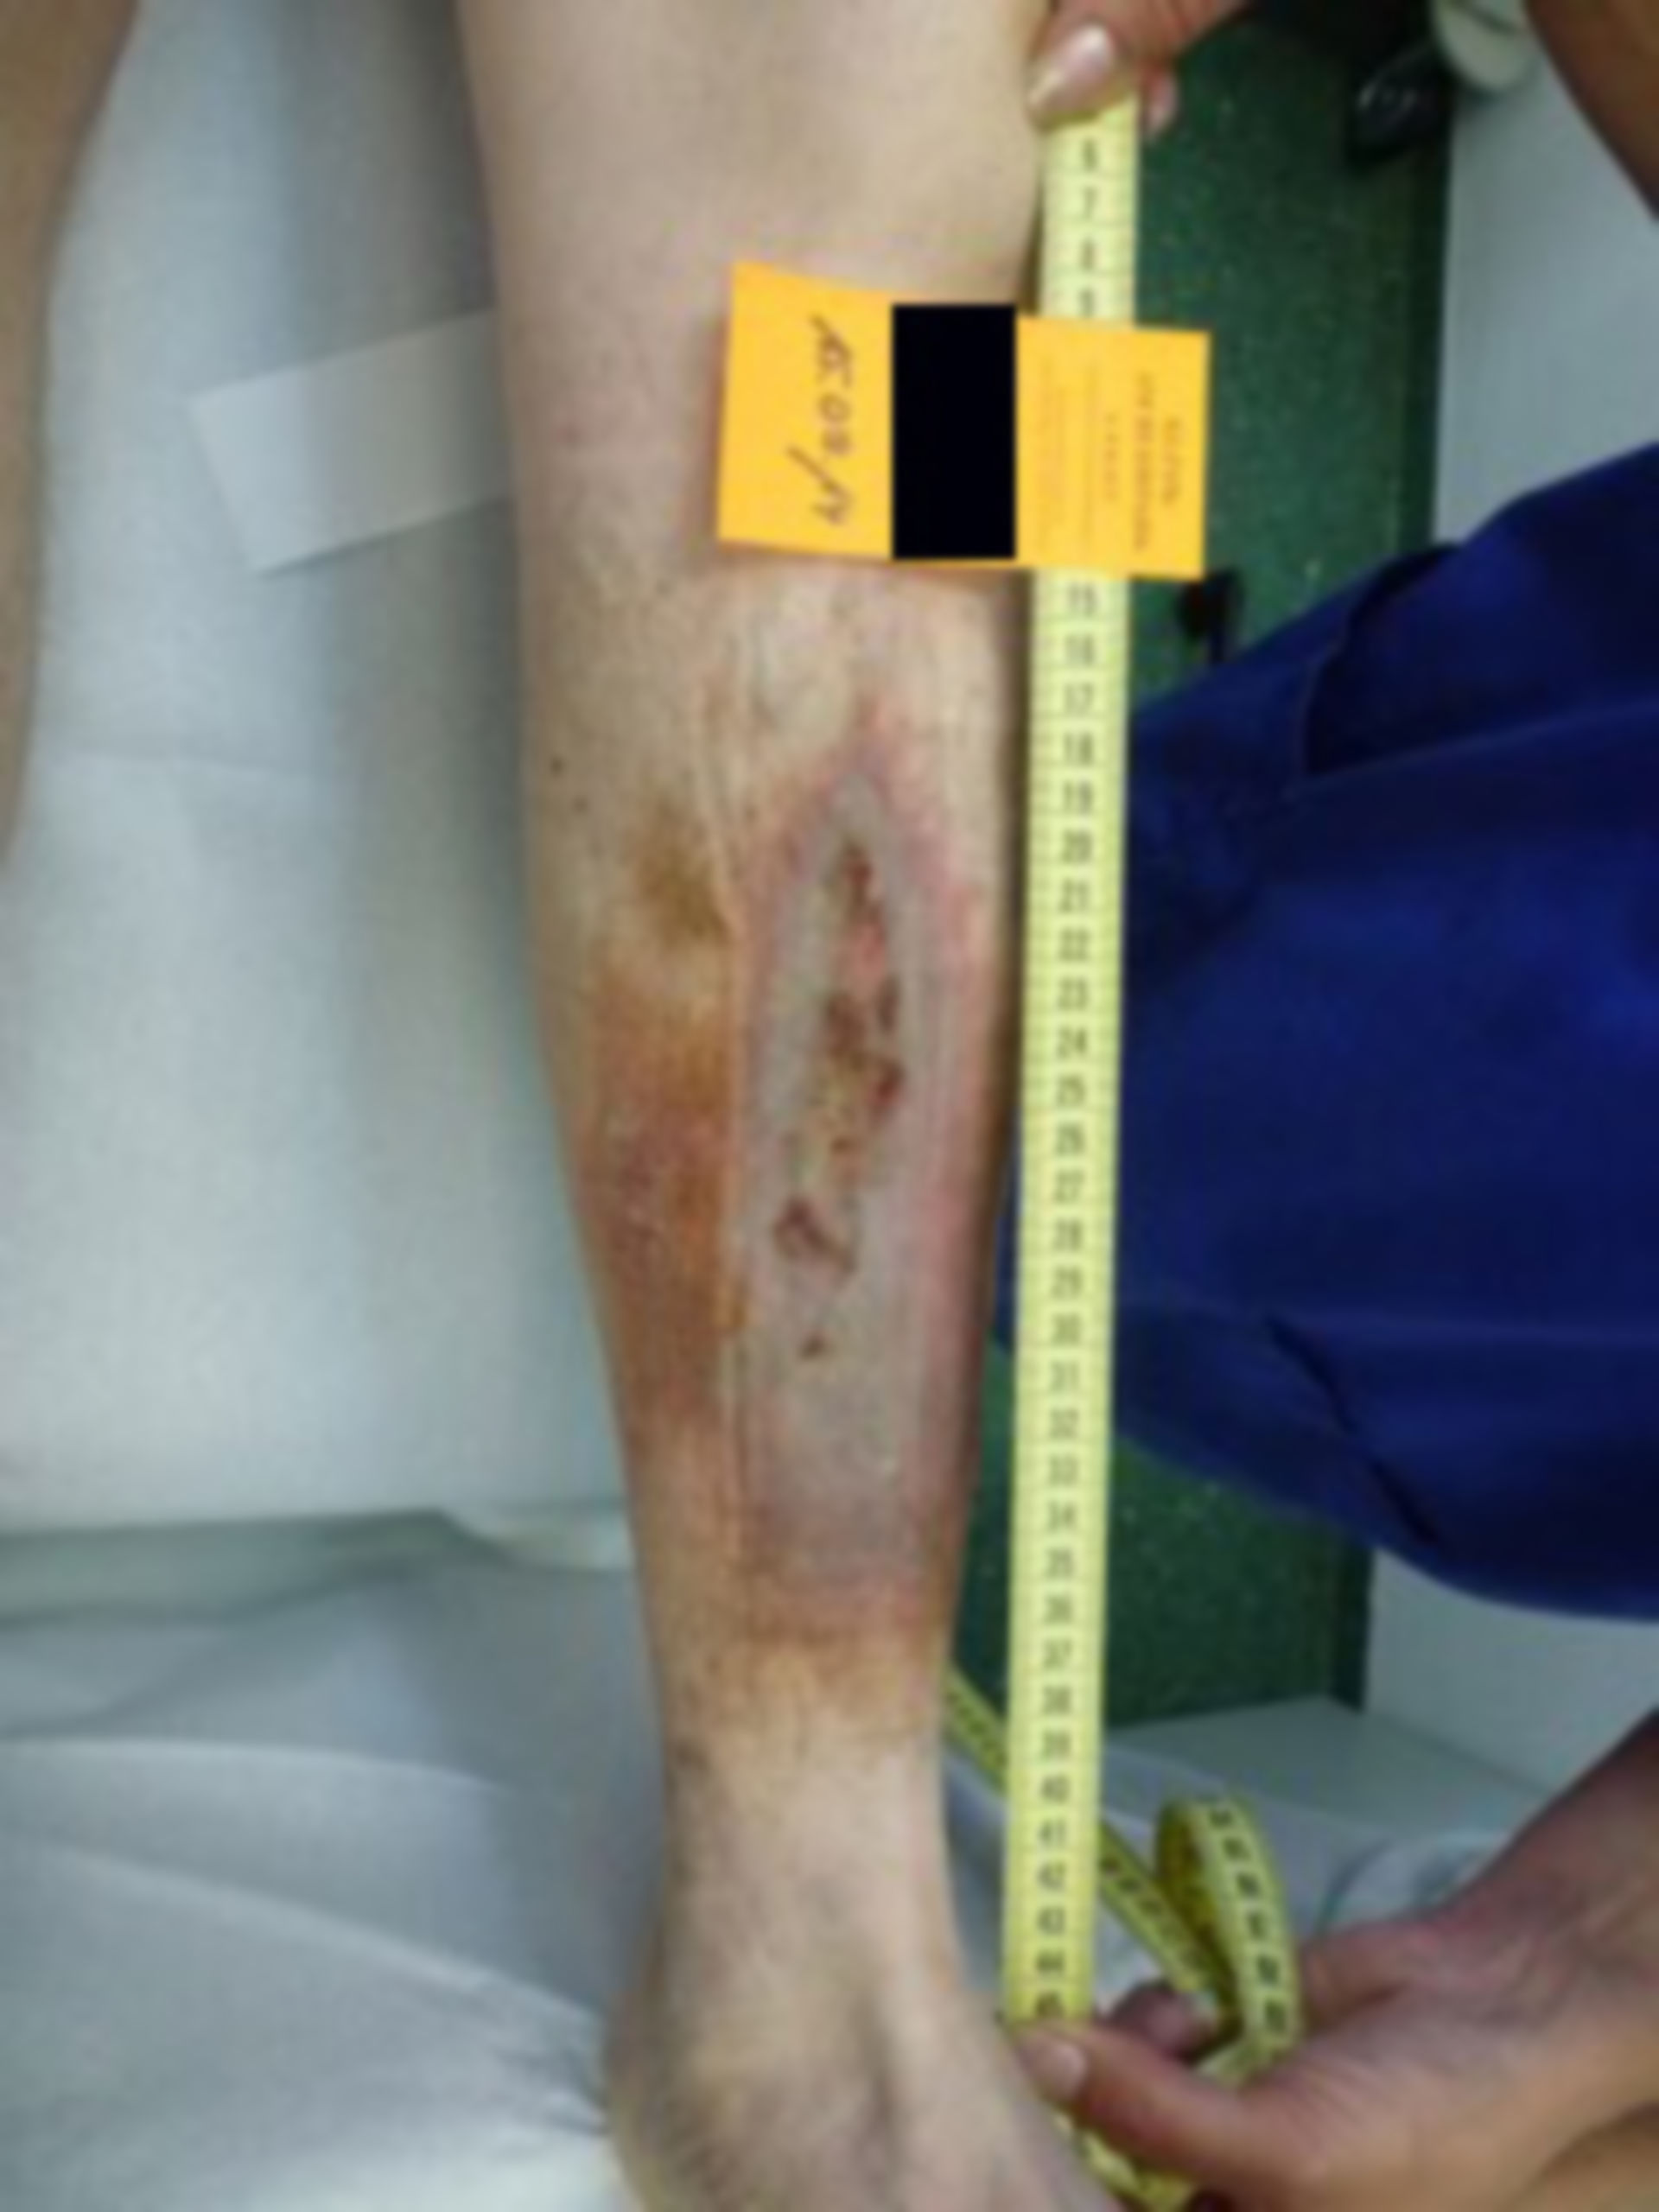 Ulcer of the lower leg - 20 years open: (10)